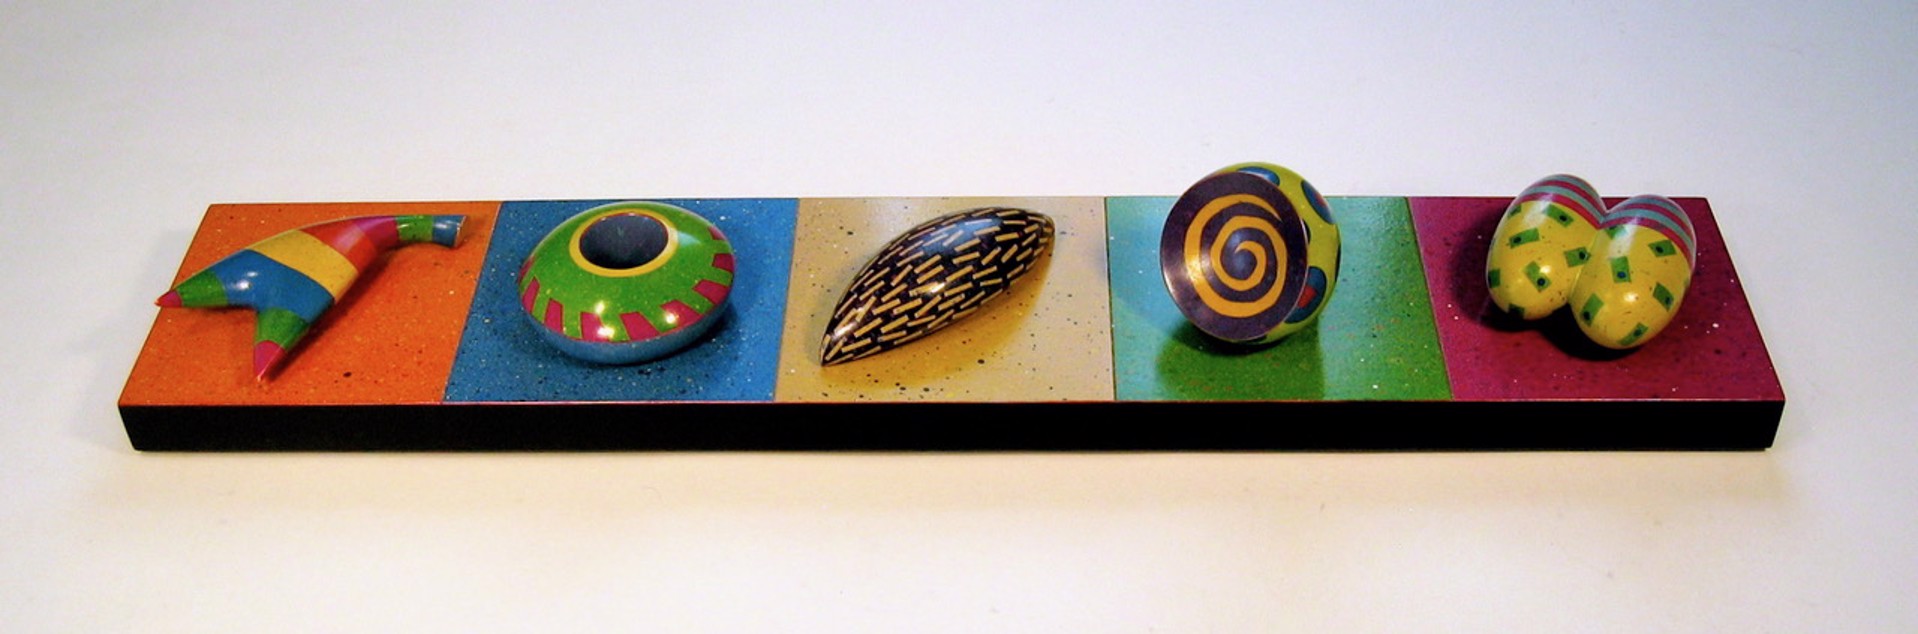 Five Objects on a Board by Sean O'Meallie